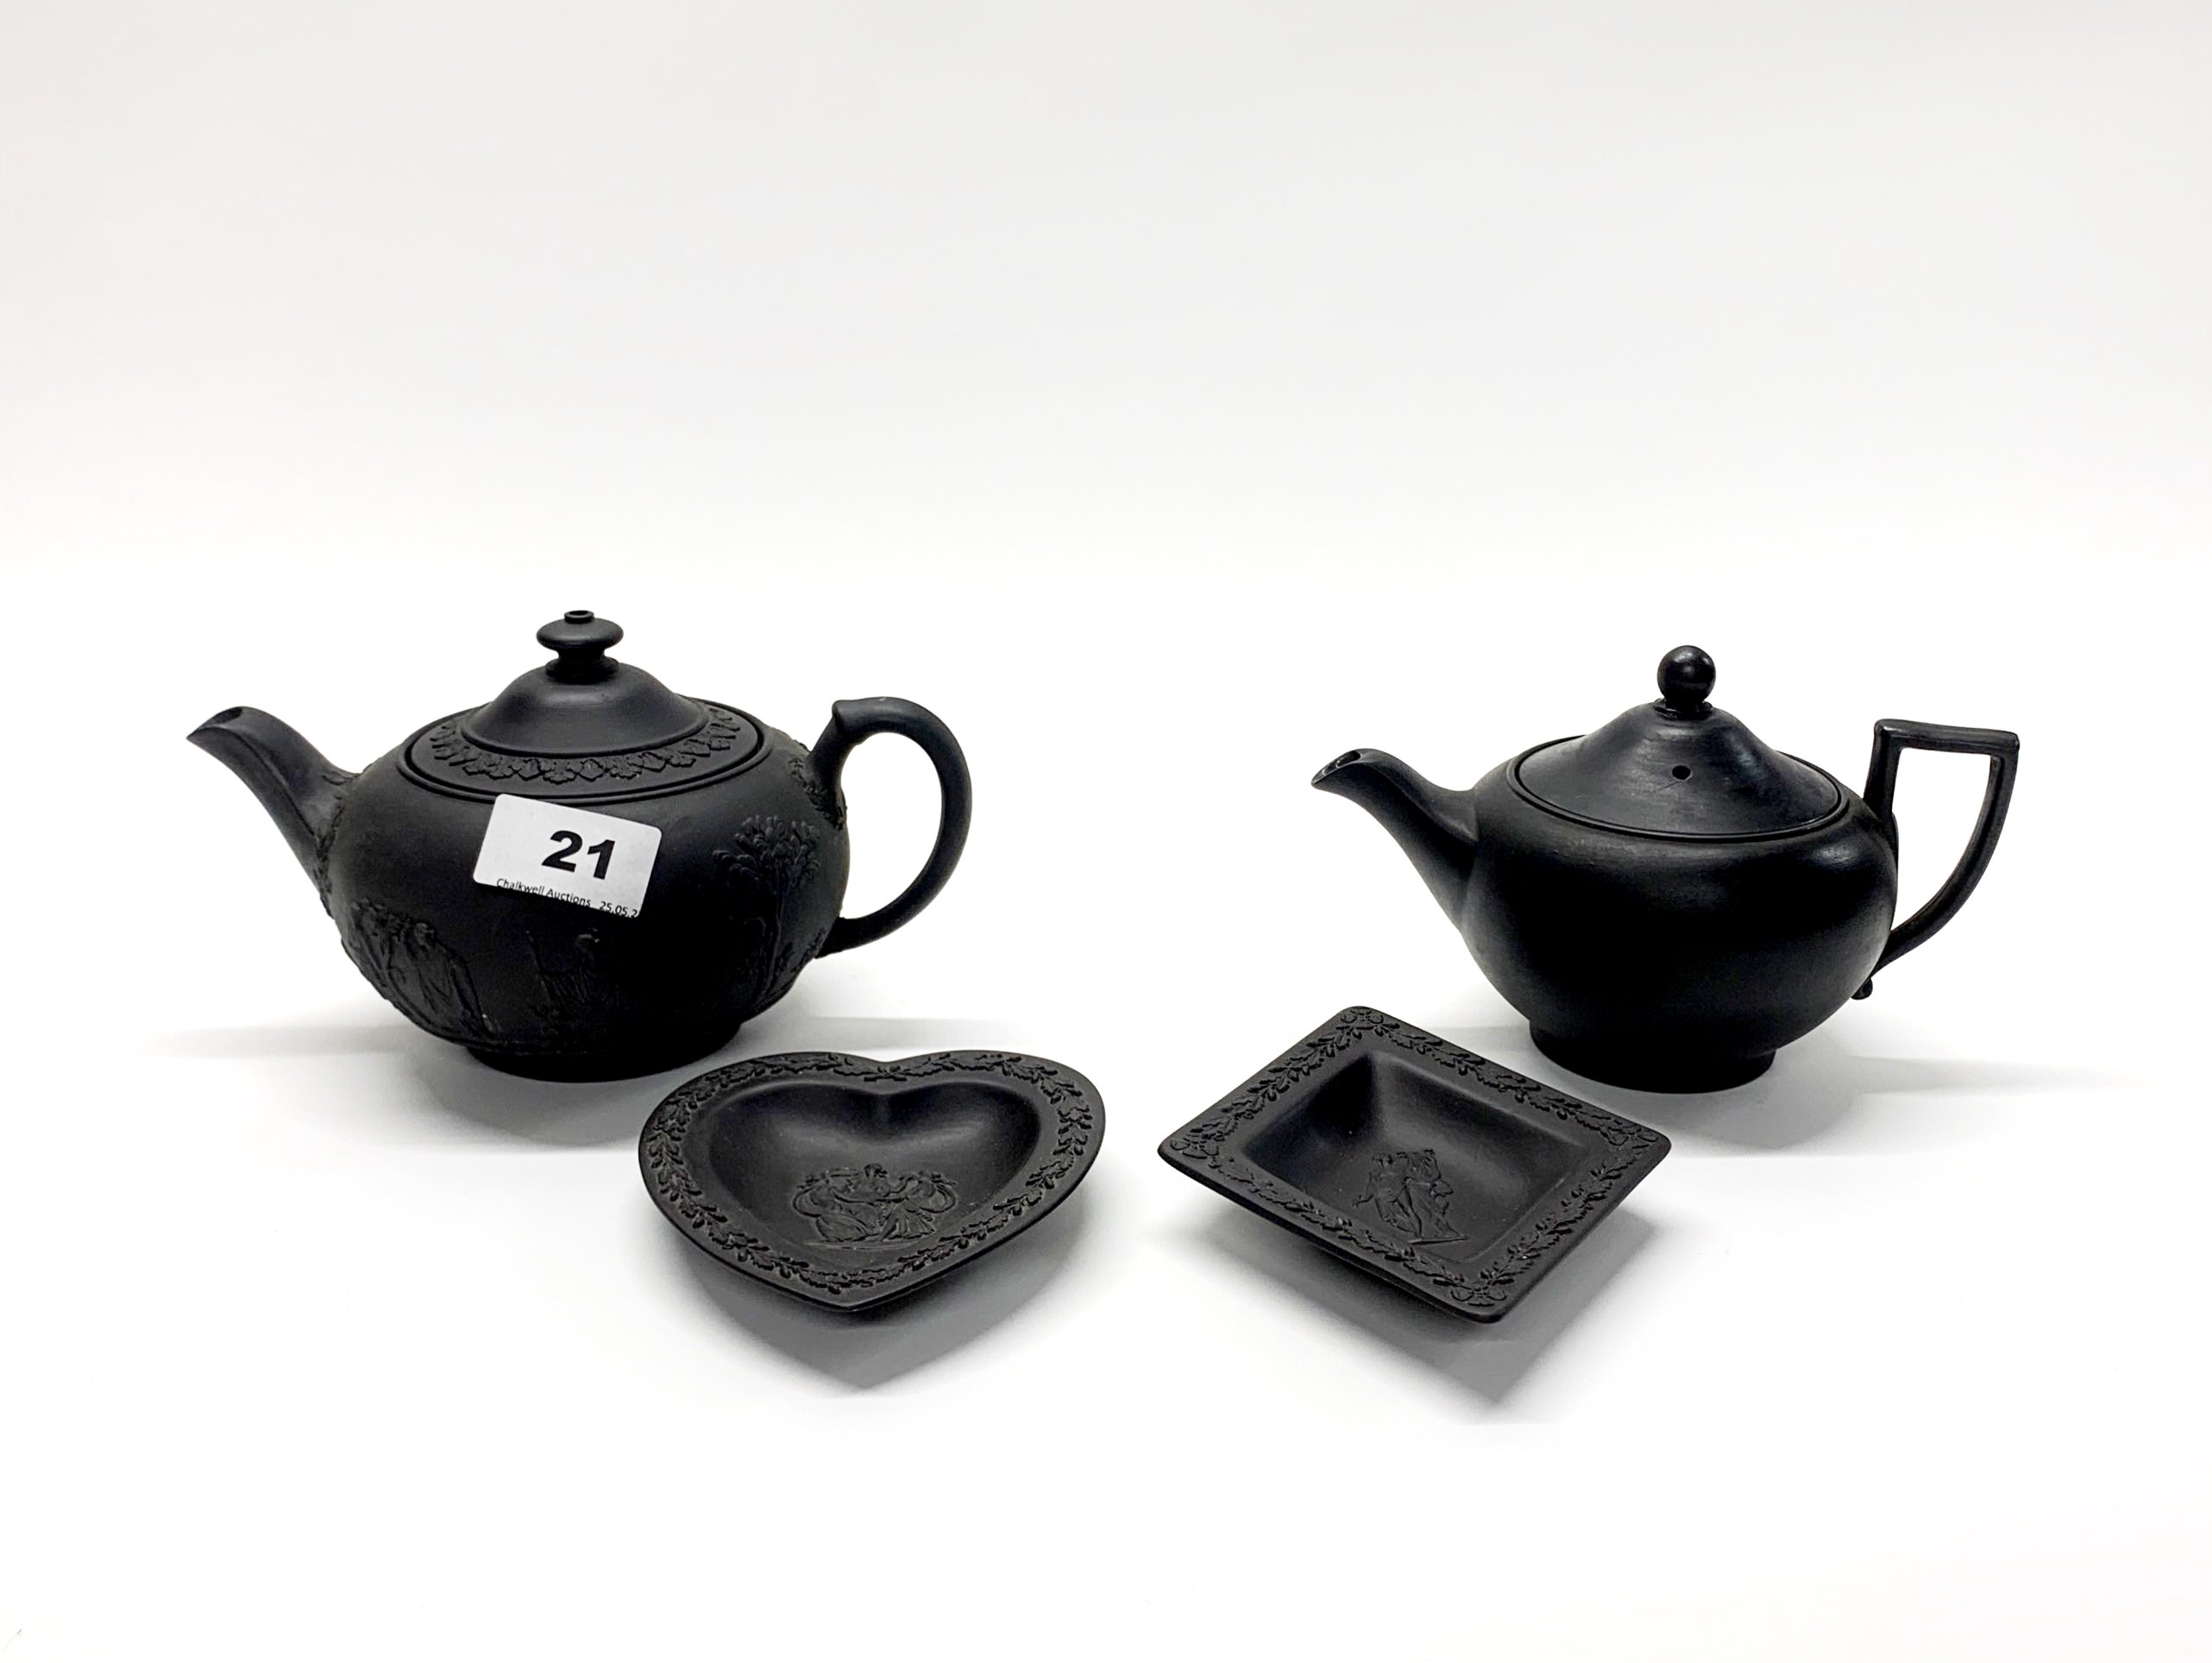 Two Wedgwood Black Basalt teapots, c. 1900, together with two Black Basalt dishes.